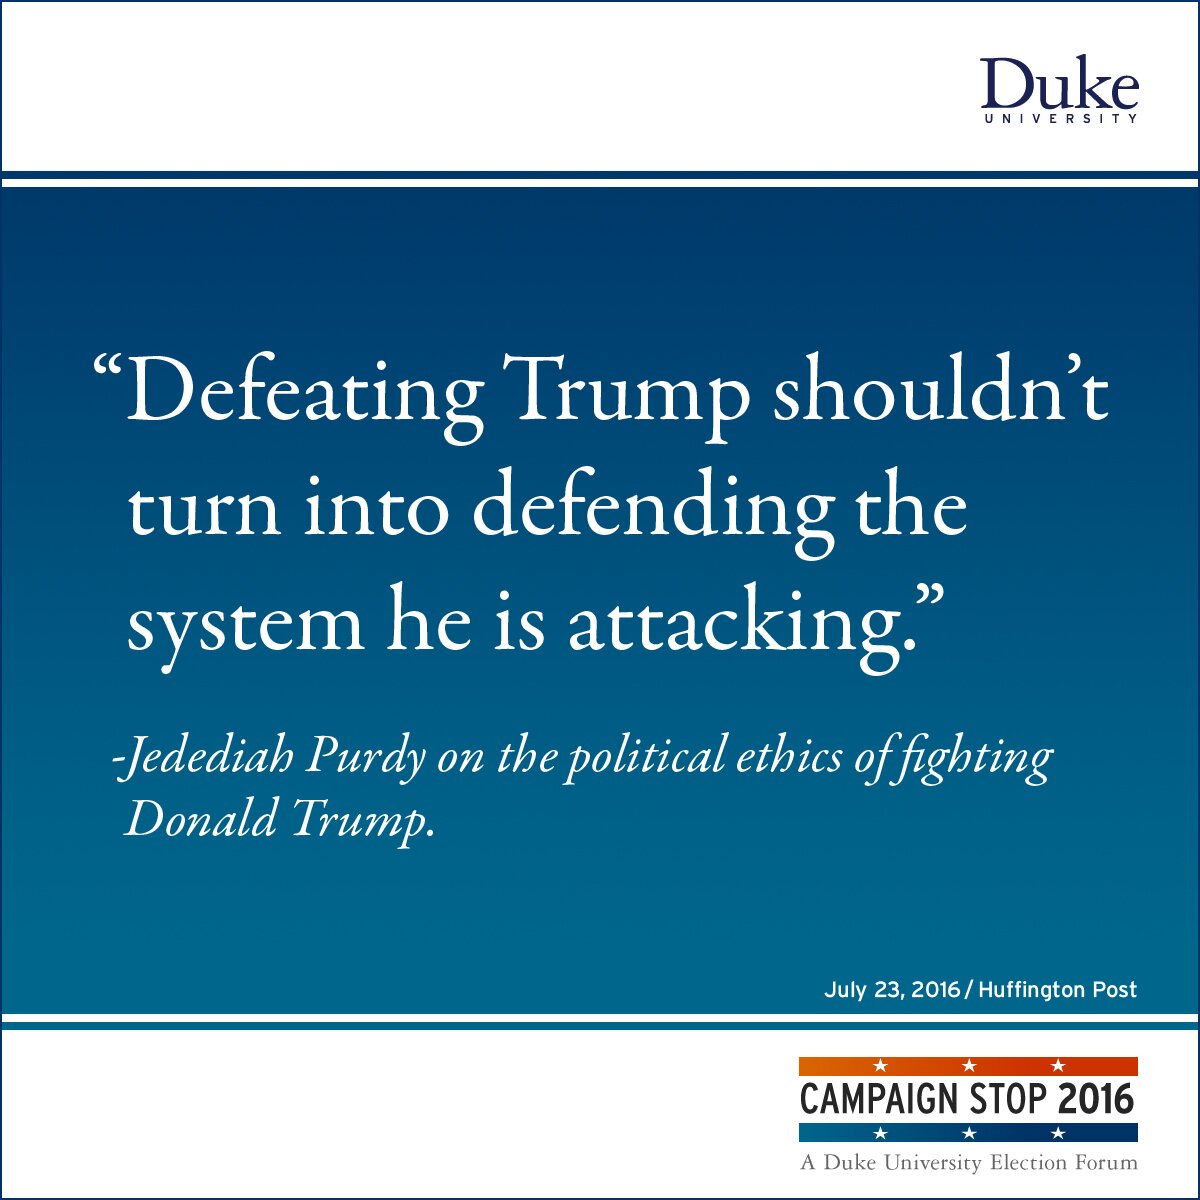 “Defeating Trump shouldn’t turn into defending the system he is attacking.” -Jedediah Purdy on the political ethics of fighting Donald Trump.